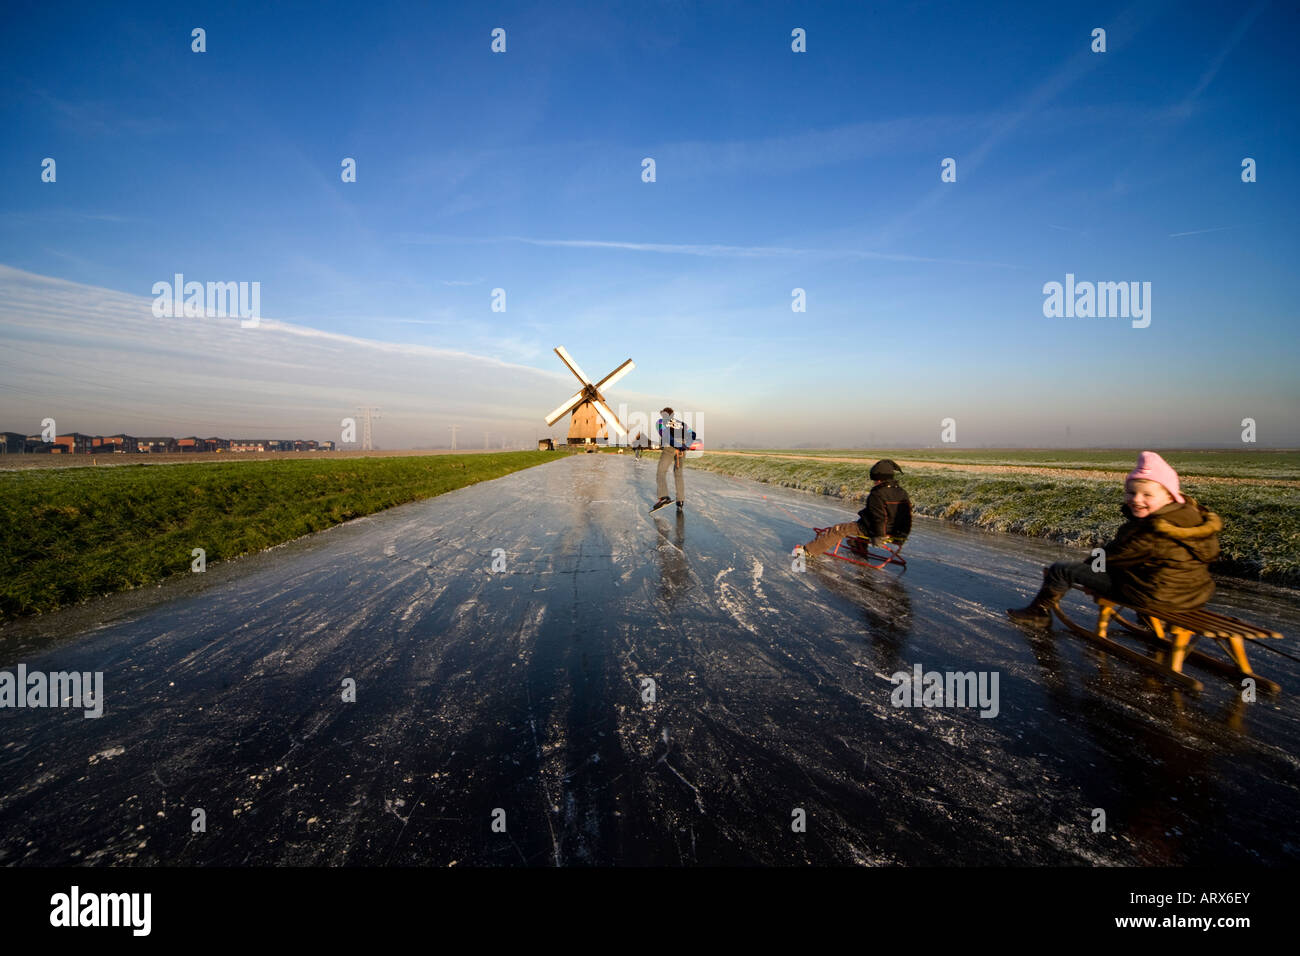 Winter in Holland. Father on skates pulls his two children on toboggans or sleds on the ice towards a windmill. Stock Photo